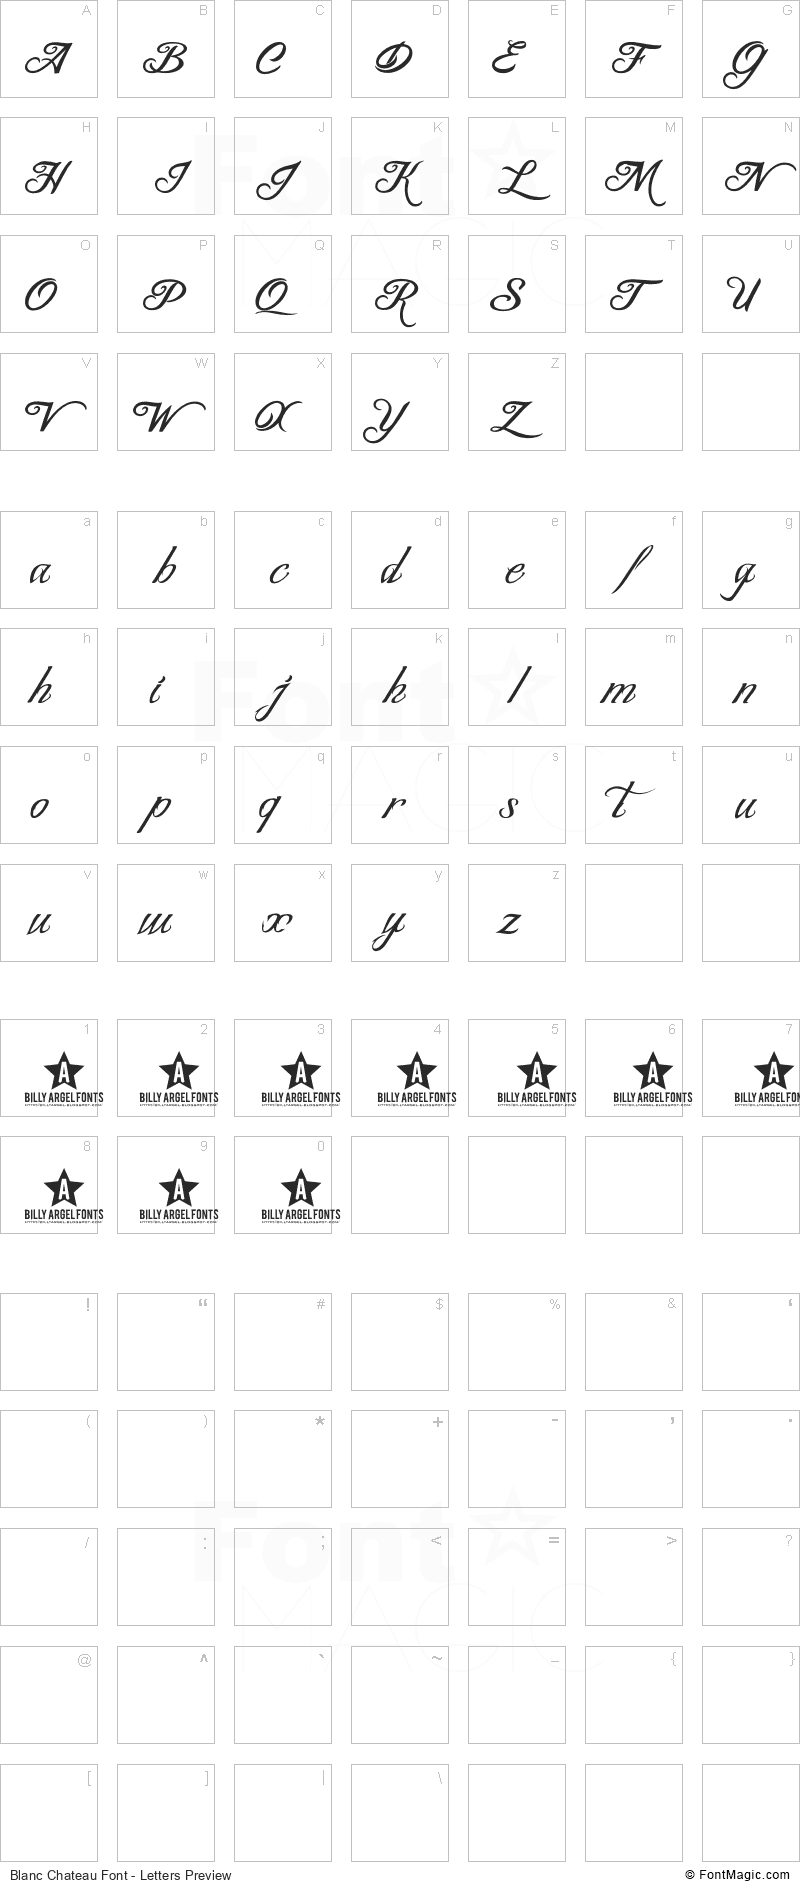 Blanc Chateau Font - All Latters Preview Chart